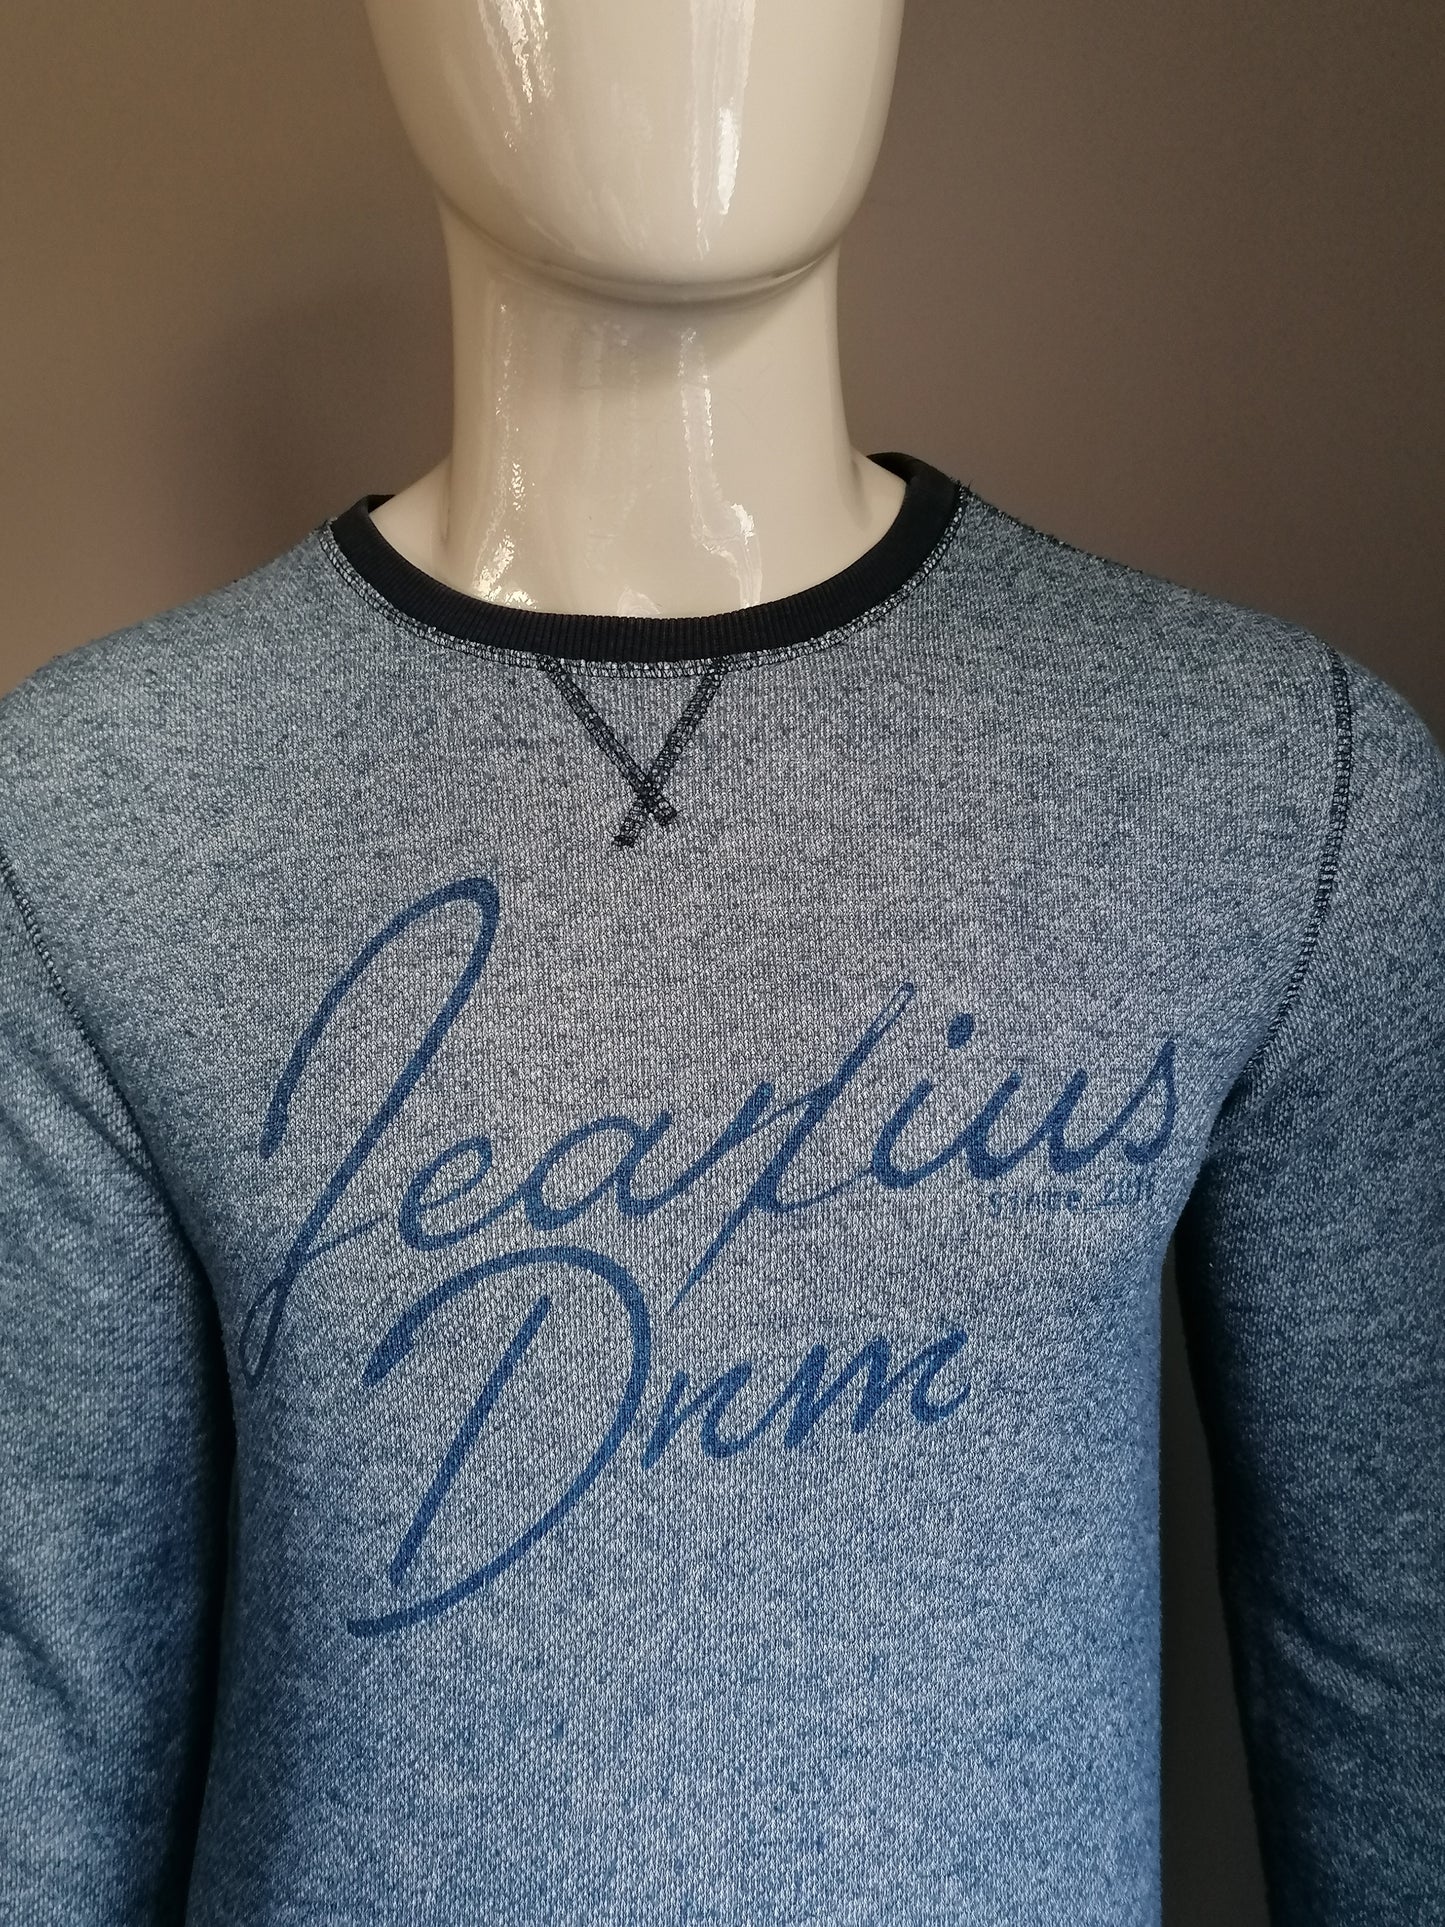 Jeanius sweater. Blue gray mixed. Size L.